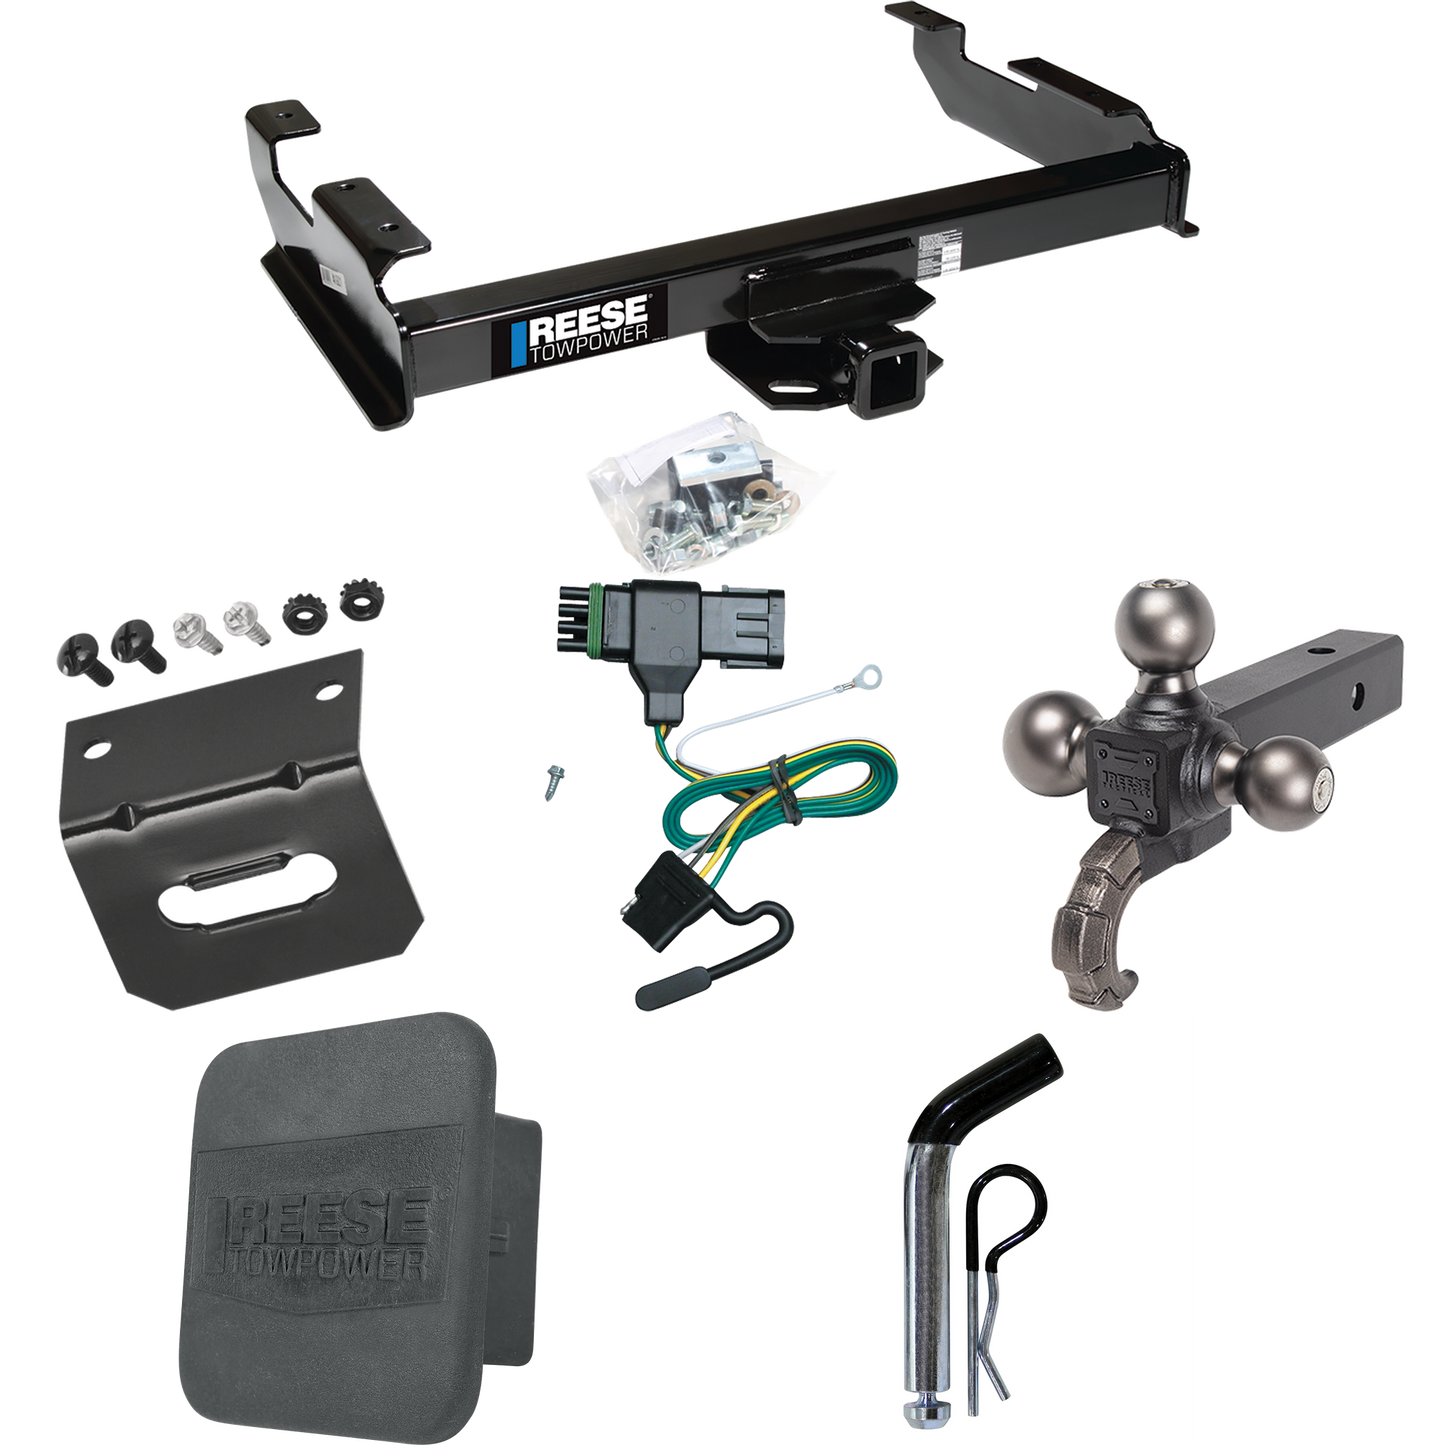 Fits 1988-1999 Chevrolet C1500 Trailer Hitch Tow PKG w/ 4-Flat Wiring Harness + Triple Ball Ball Mount 1-7/8" & 2" & 2-5/16" Trailer Balls w/ Tow Hook + Pin/Clip + Hitch Cover + Wiring Bracket By Reese Towpower